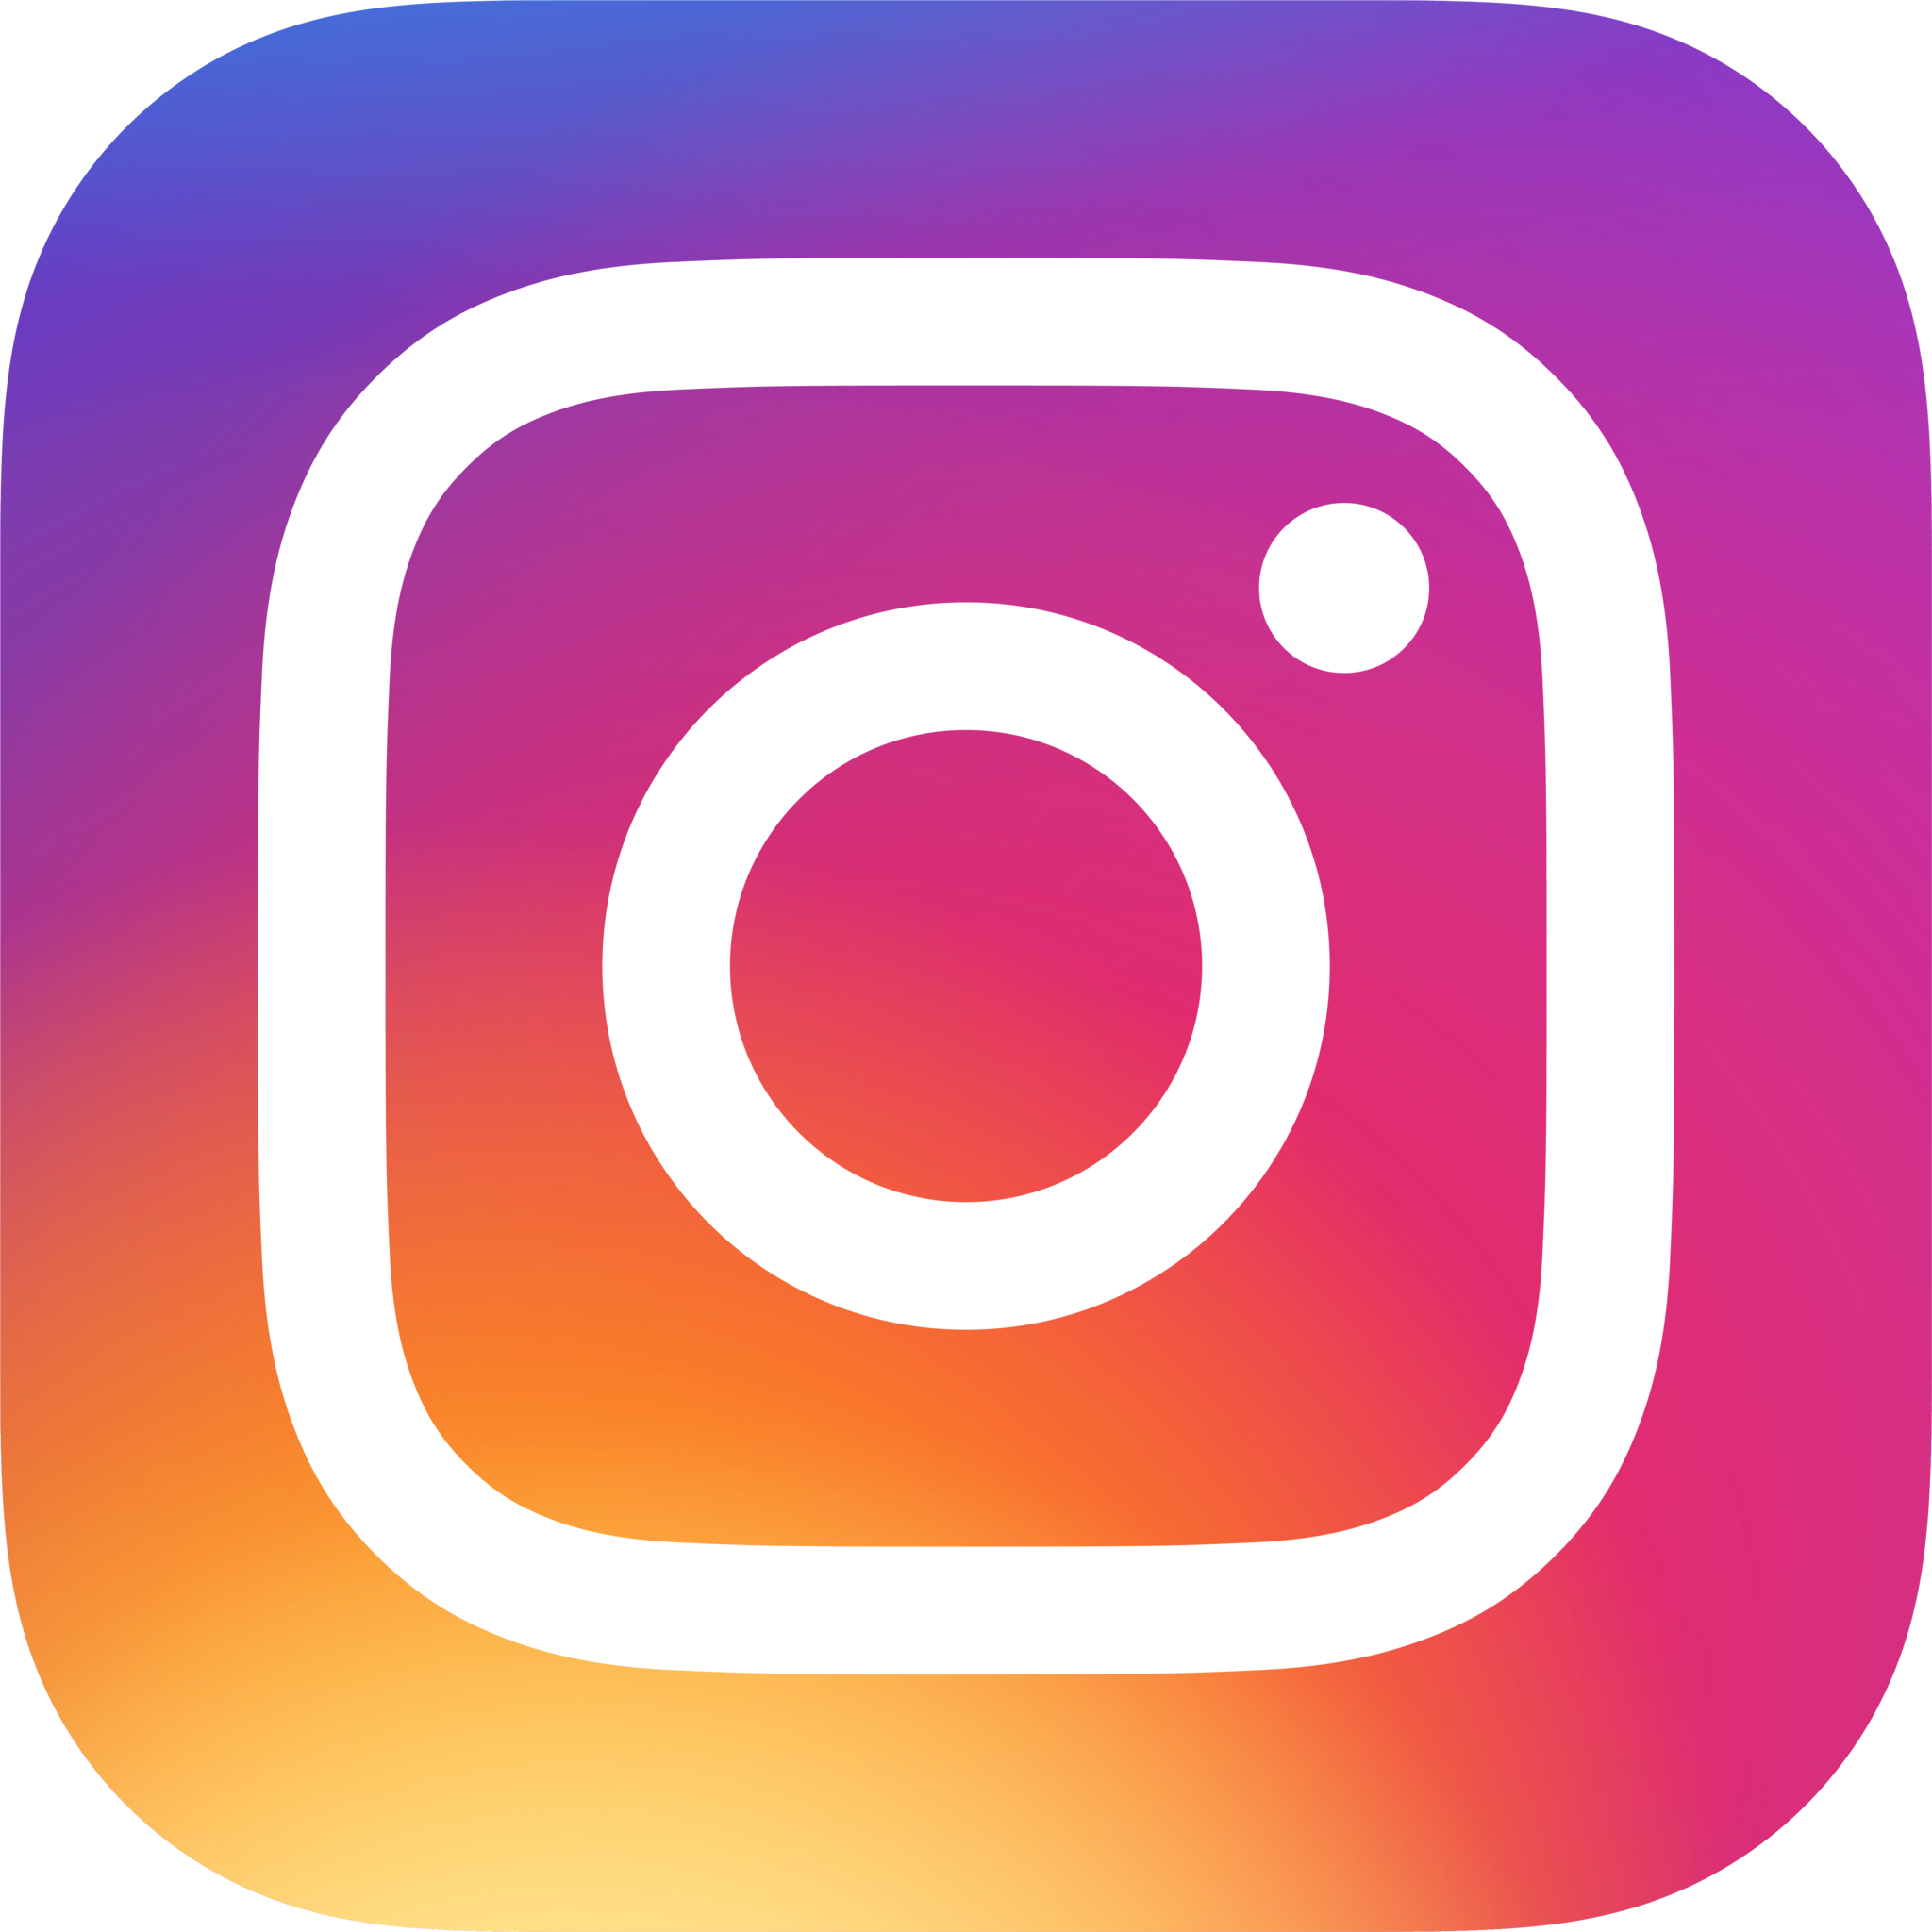 An image of instagram